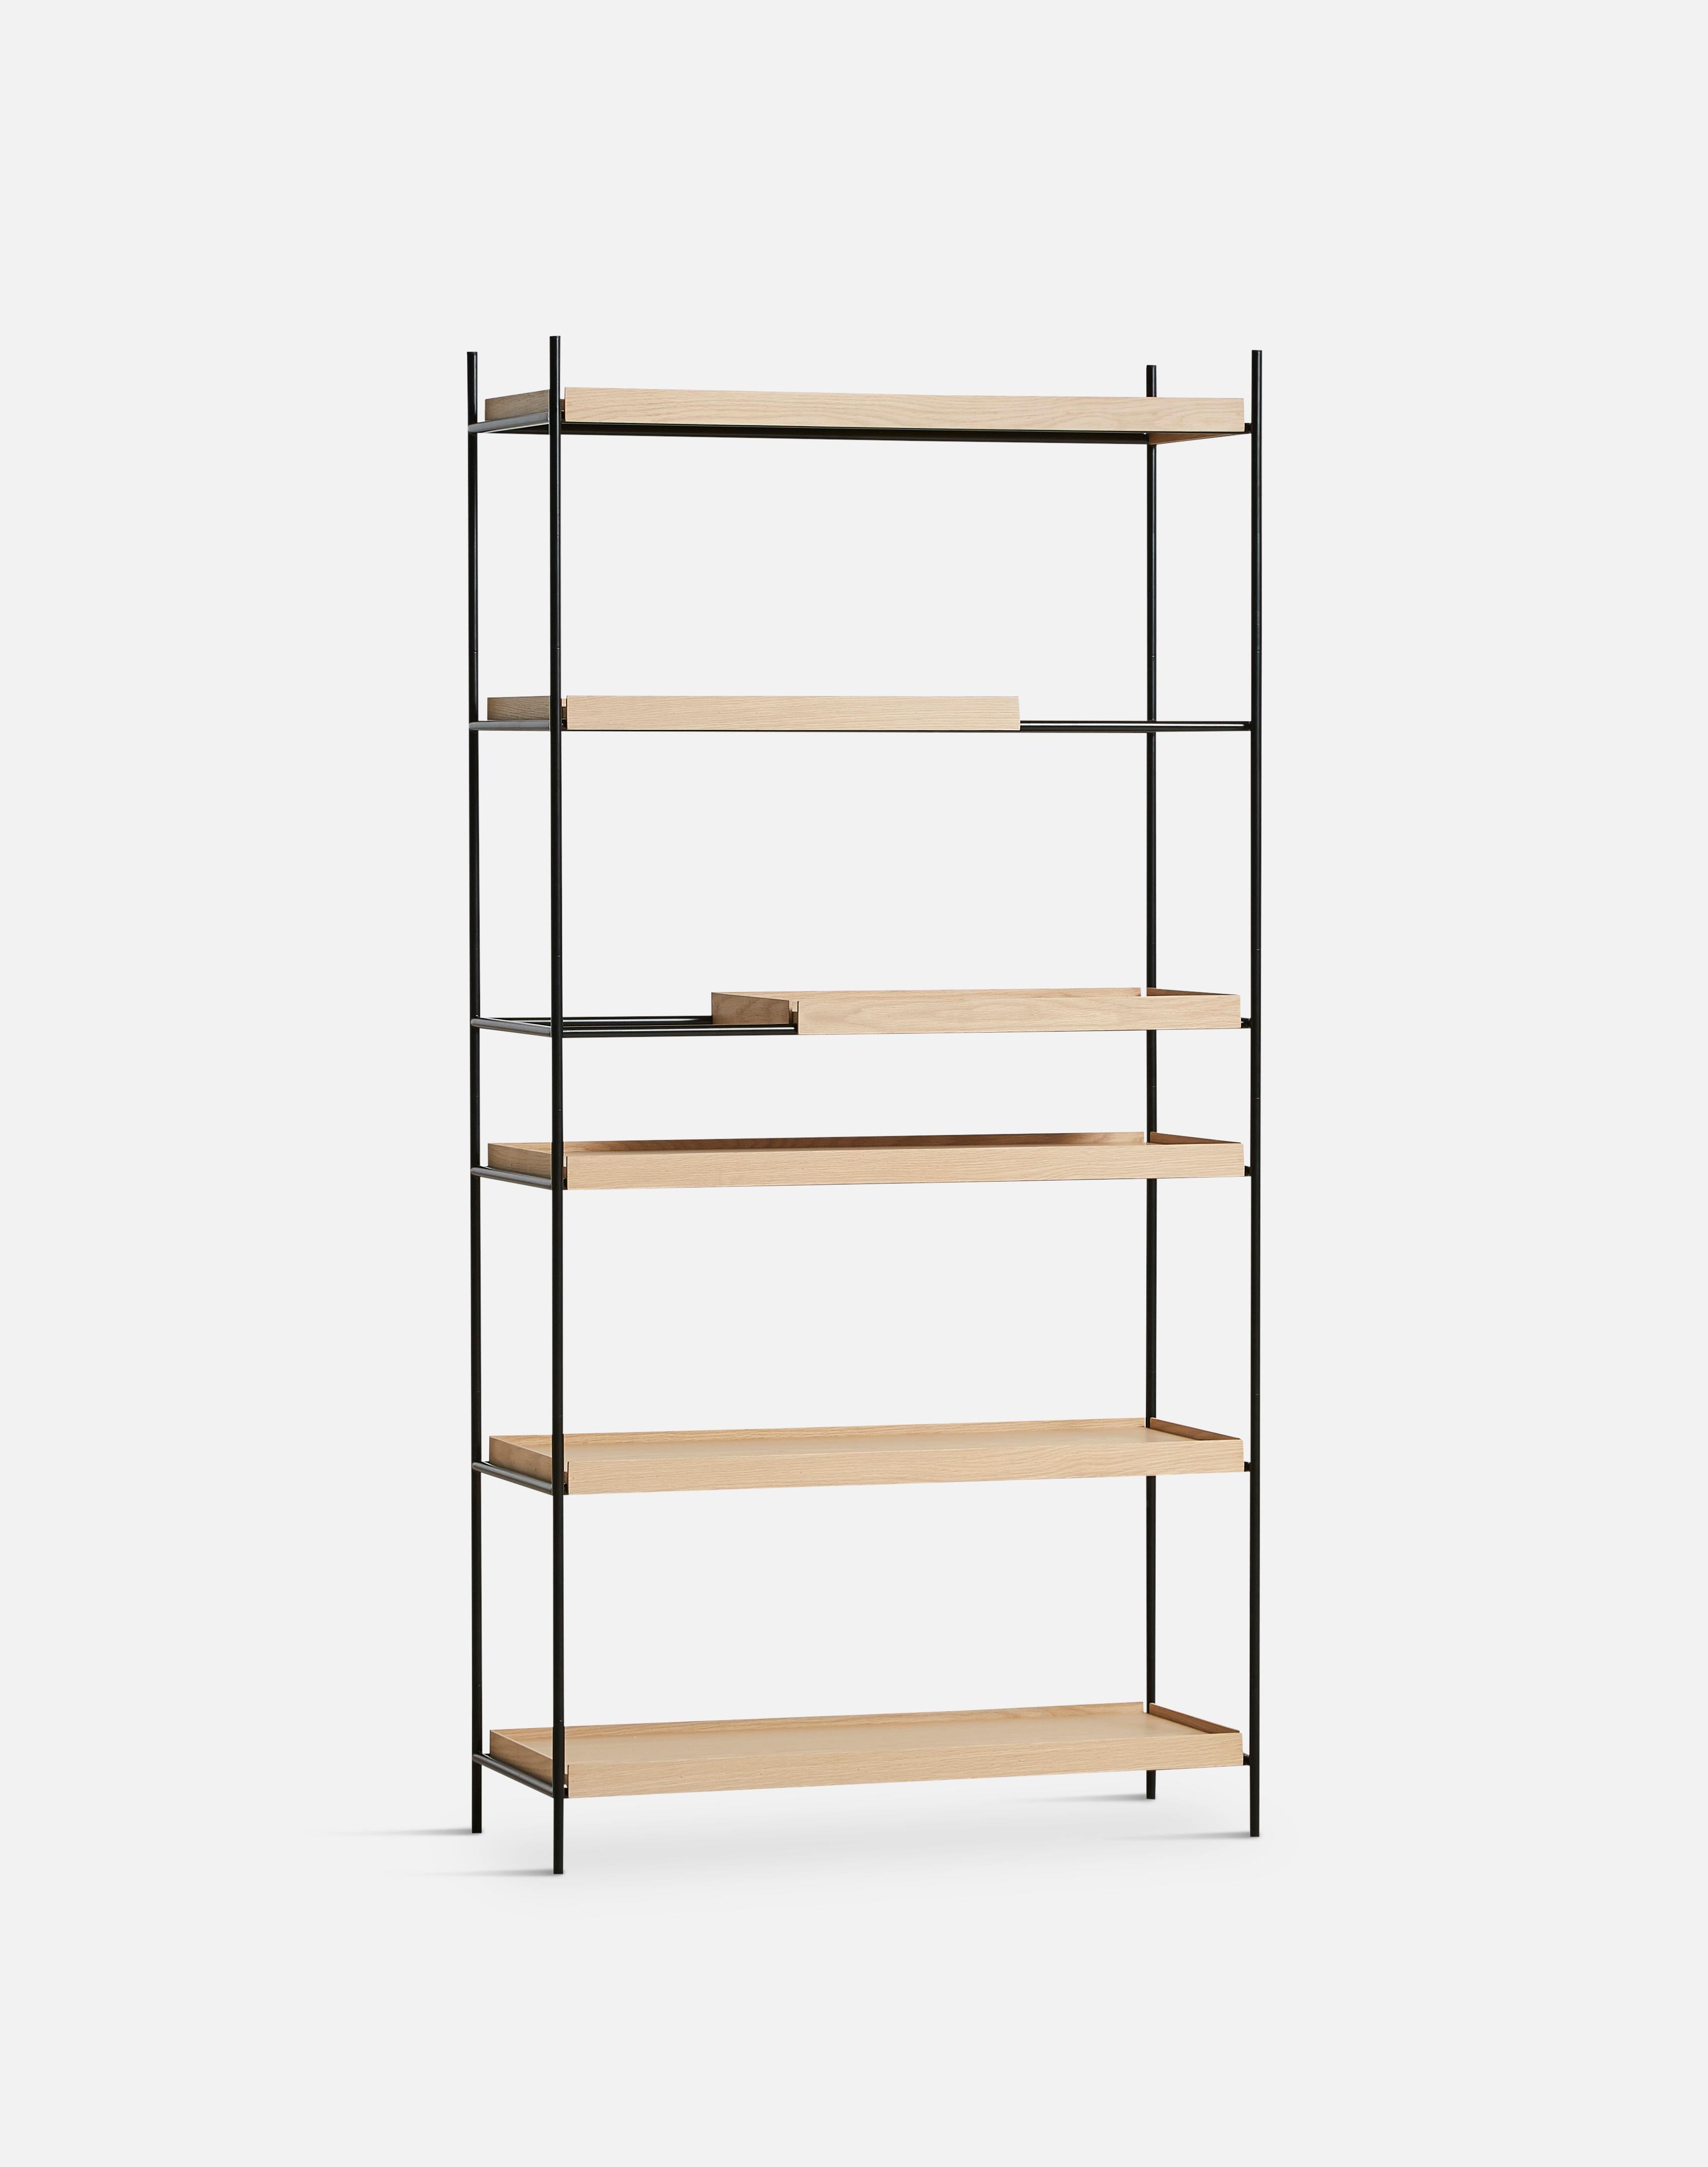 High oak tray shelf by Hanne Willmann
Materials: metal, oak.
Dimensions: D 40 x W 100 x H 201 cm
Also available in different tray conbinations and 2 sizes: H81, H 201 cm.

Hanne Willmann is a dynamic German designer with her own